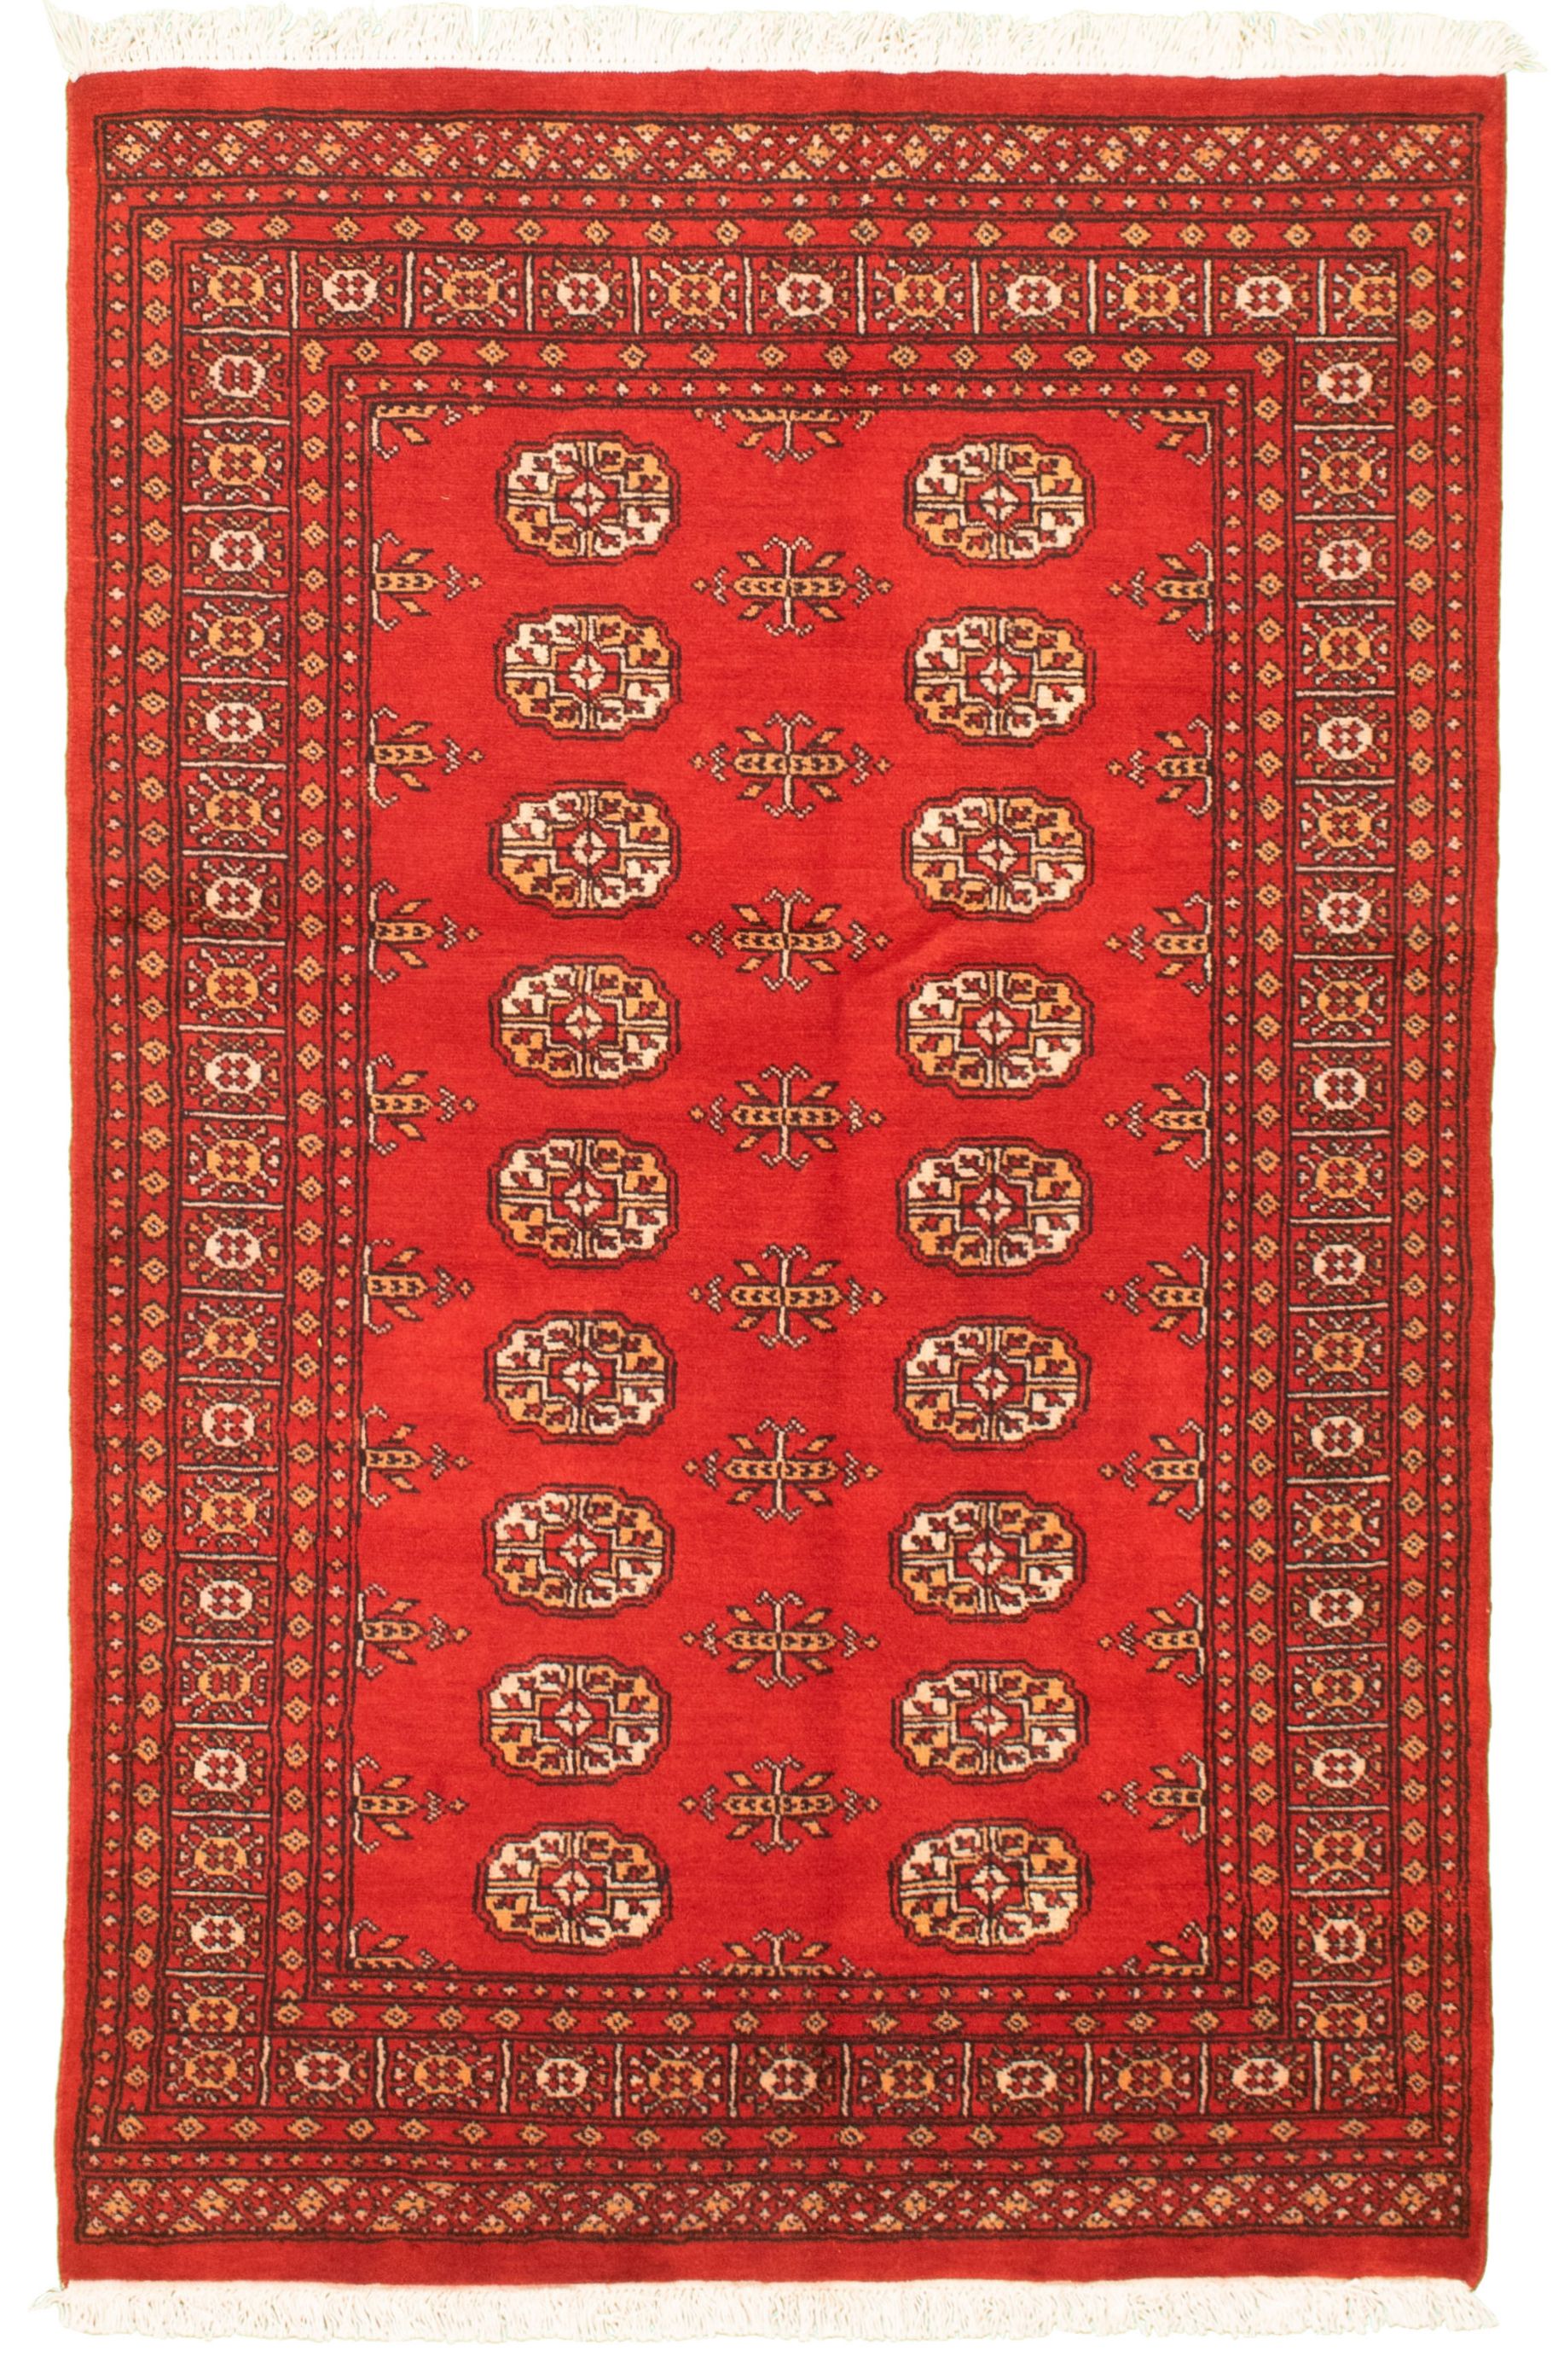 Hand-knotted Finest Peshawar Bokhara Red Wool Rug 4'0" x 6'3"  Size: 4'0" x 6'3"  